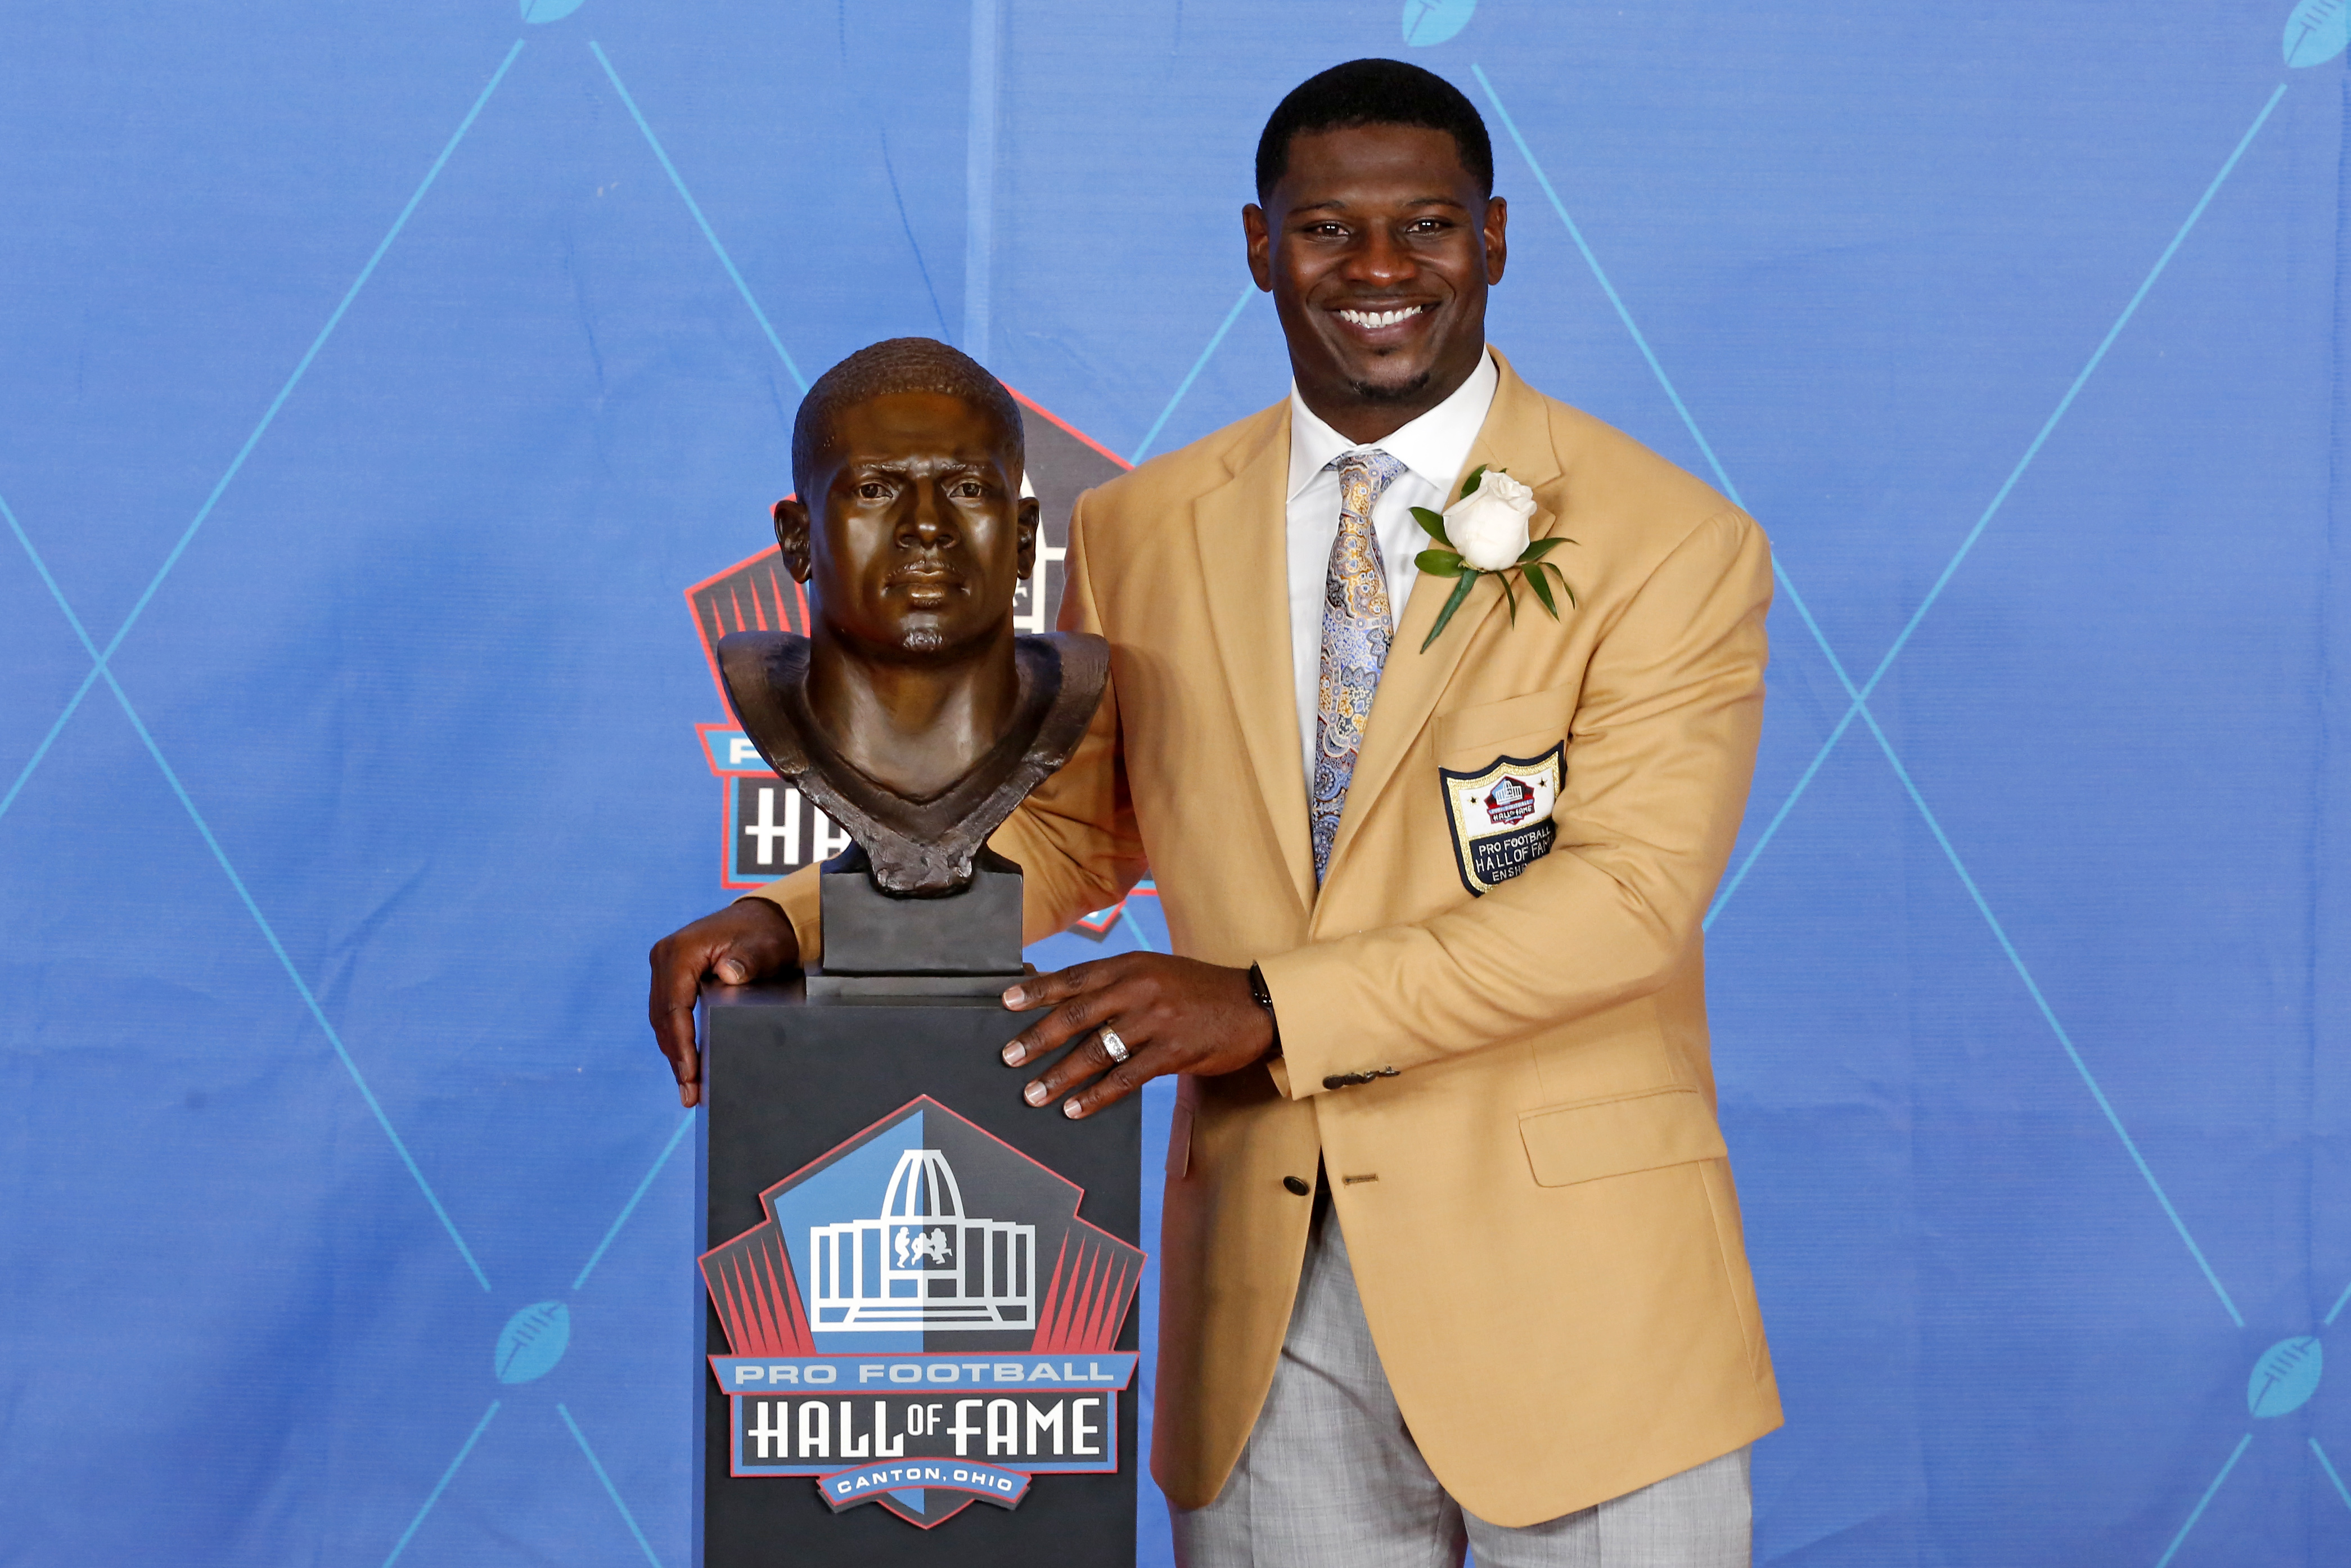 Former NFL player LaDainian Tomlinson poses with a bust of himself during an induction ceremony at the Pro Football Hall of Fame Saturday, Aug. 5, 2017, in Canton, Ohio. (Gene J. Puskar—AP)